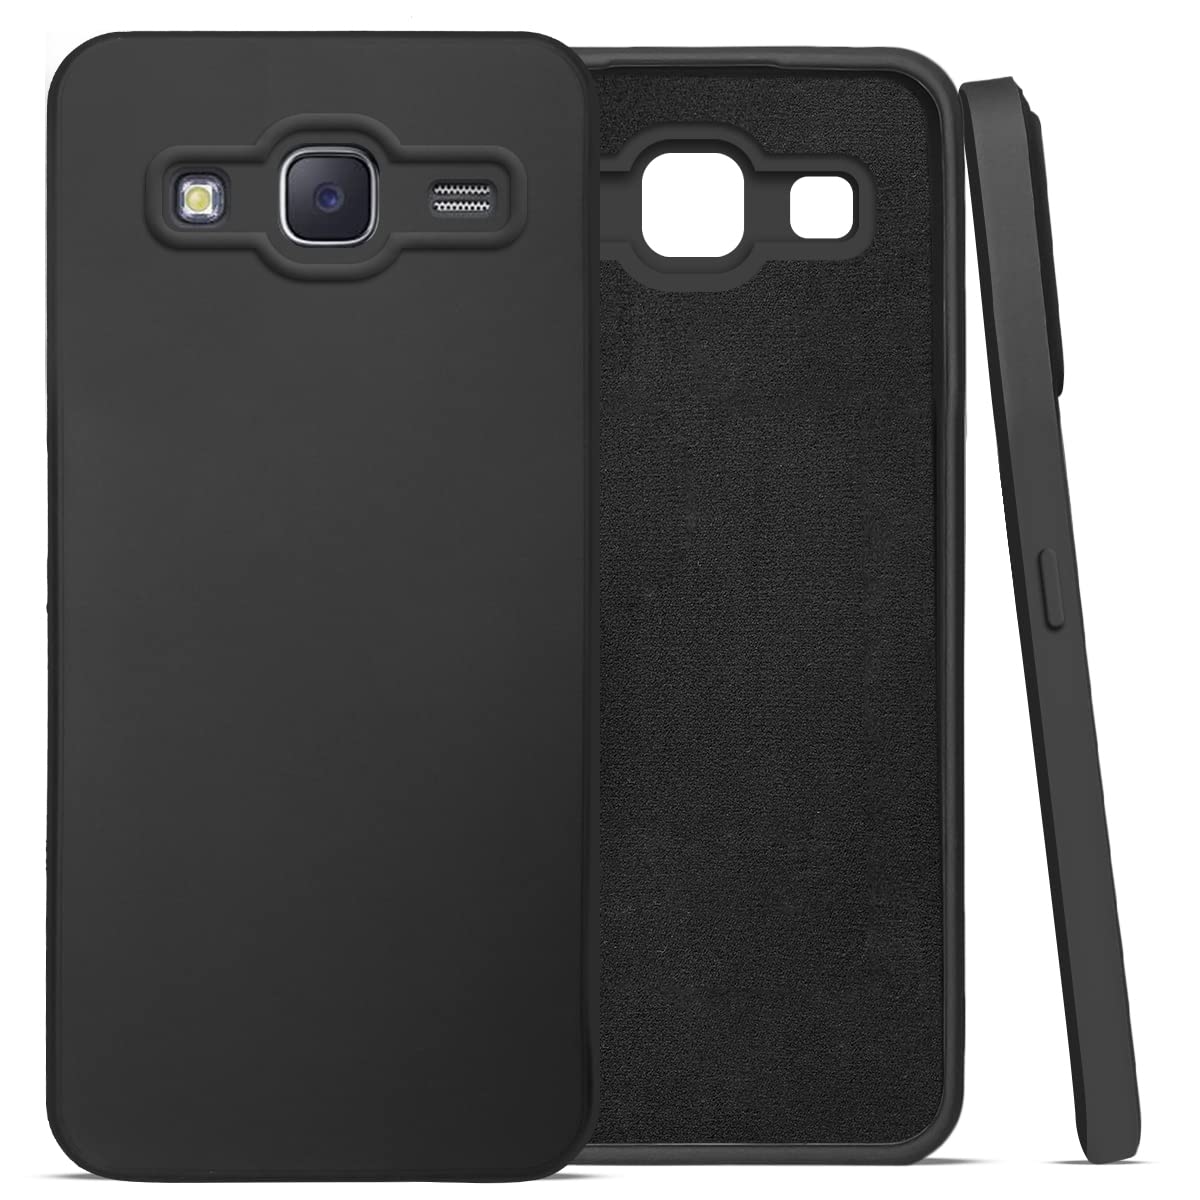 Samsung Galaxy J7 Silicone + Cloth inner side Back cover